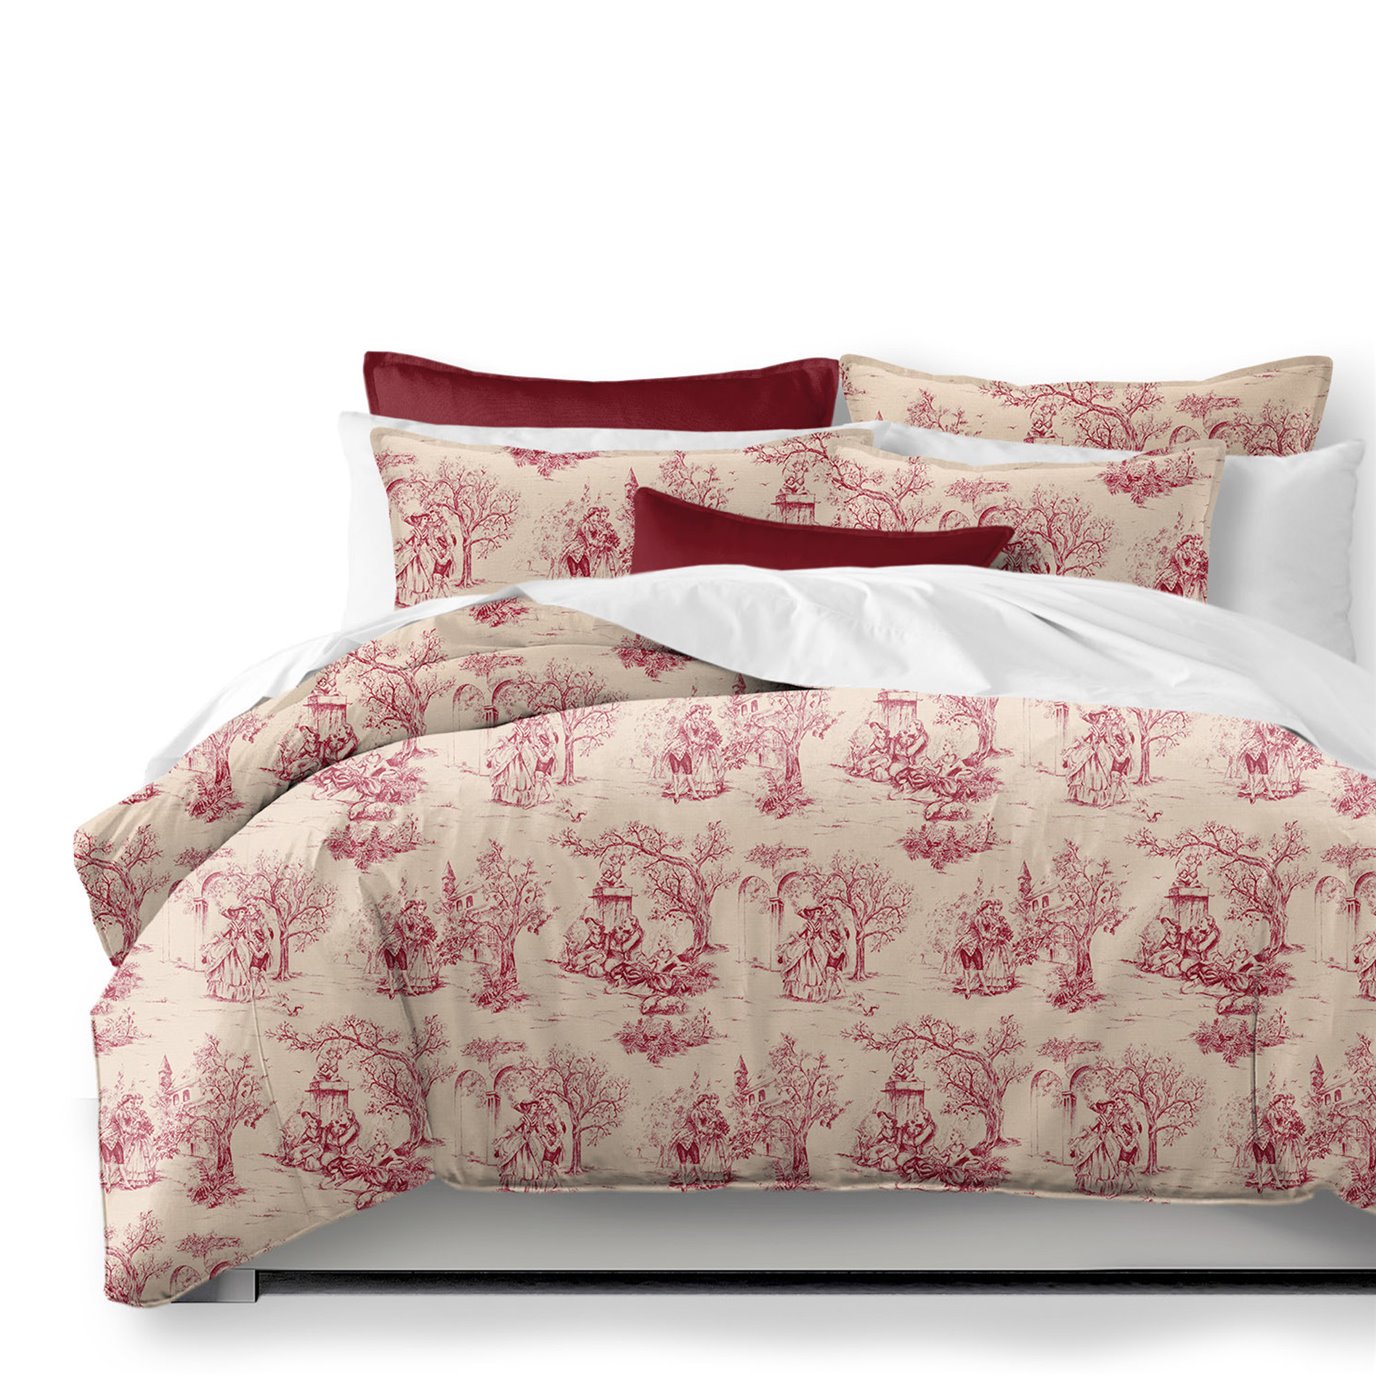 Archamps Toile Red Comforter and Pillow Sham(s) Set - Size Twin